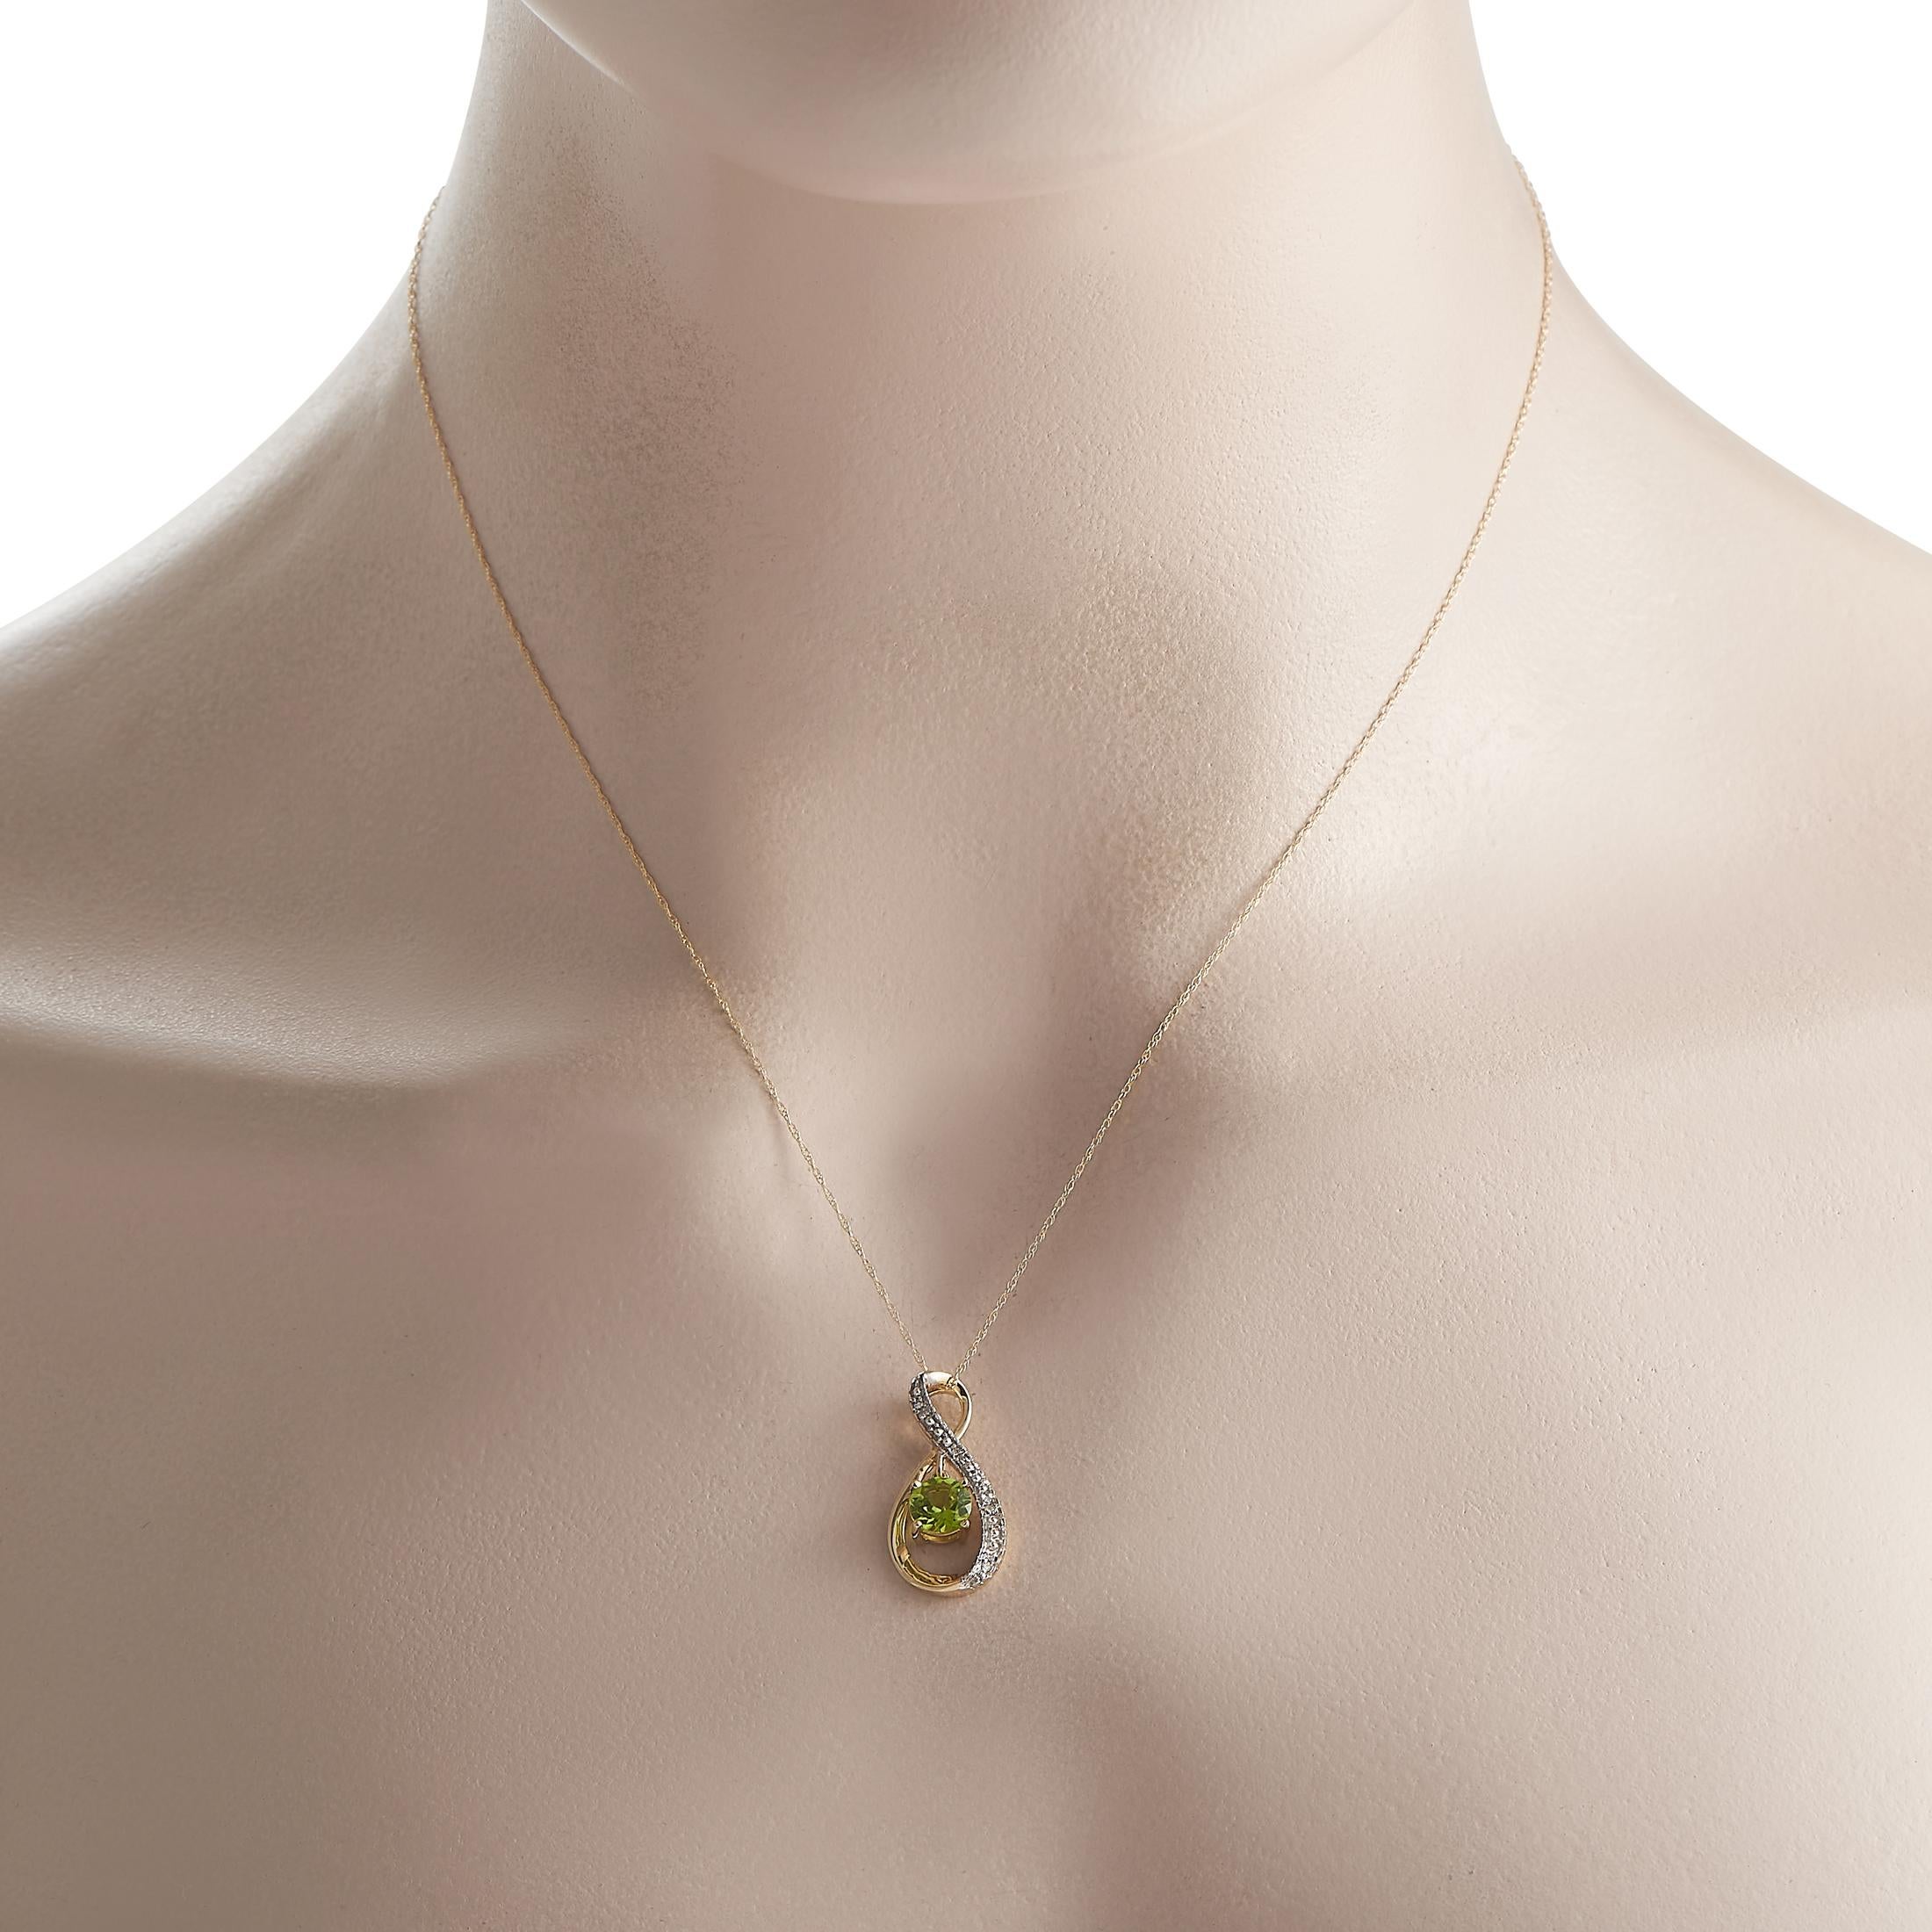 Freshen up your daily look with a radiant pop of color through this LB Exclusive necklace. This yellow-gold beauty features an 18 double cable chain holding a stylized infinity pendant. The pendant is embellished with a short row of round diamonds